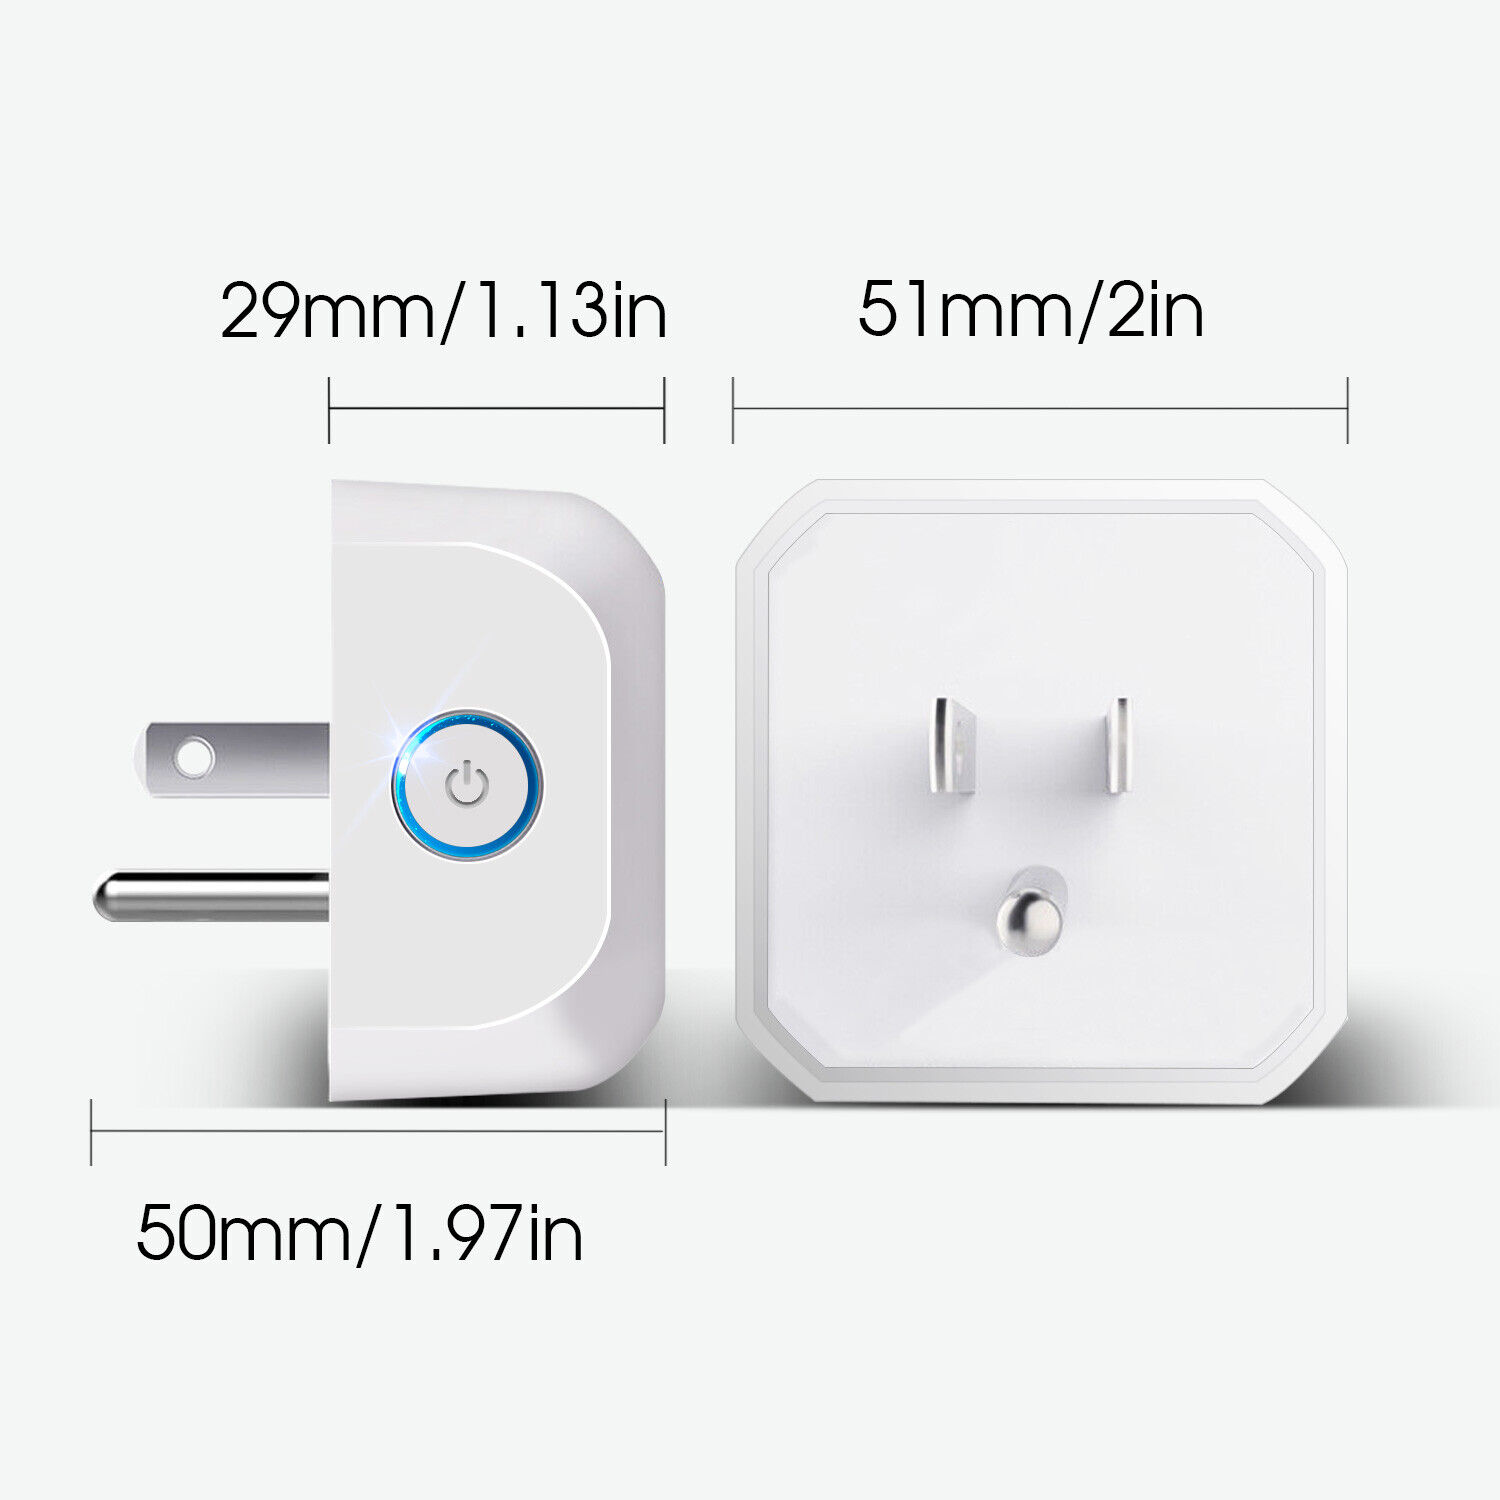 3Pack Smart WiFi Plug Switch Remote Control Timer Power Socket Alexa Google Home Kootion Does not apply - фотография #8